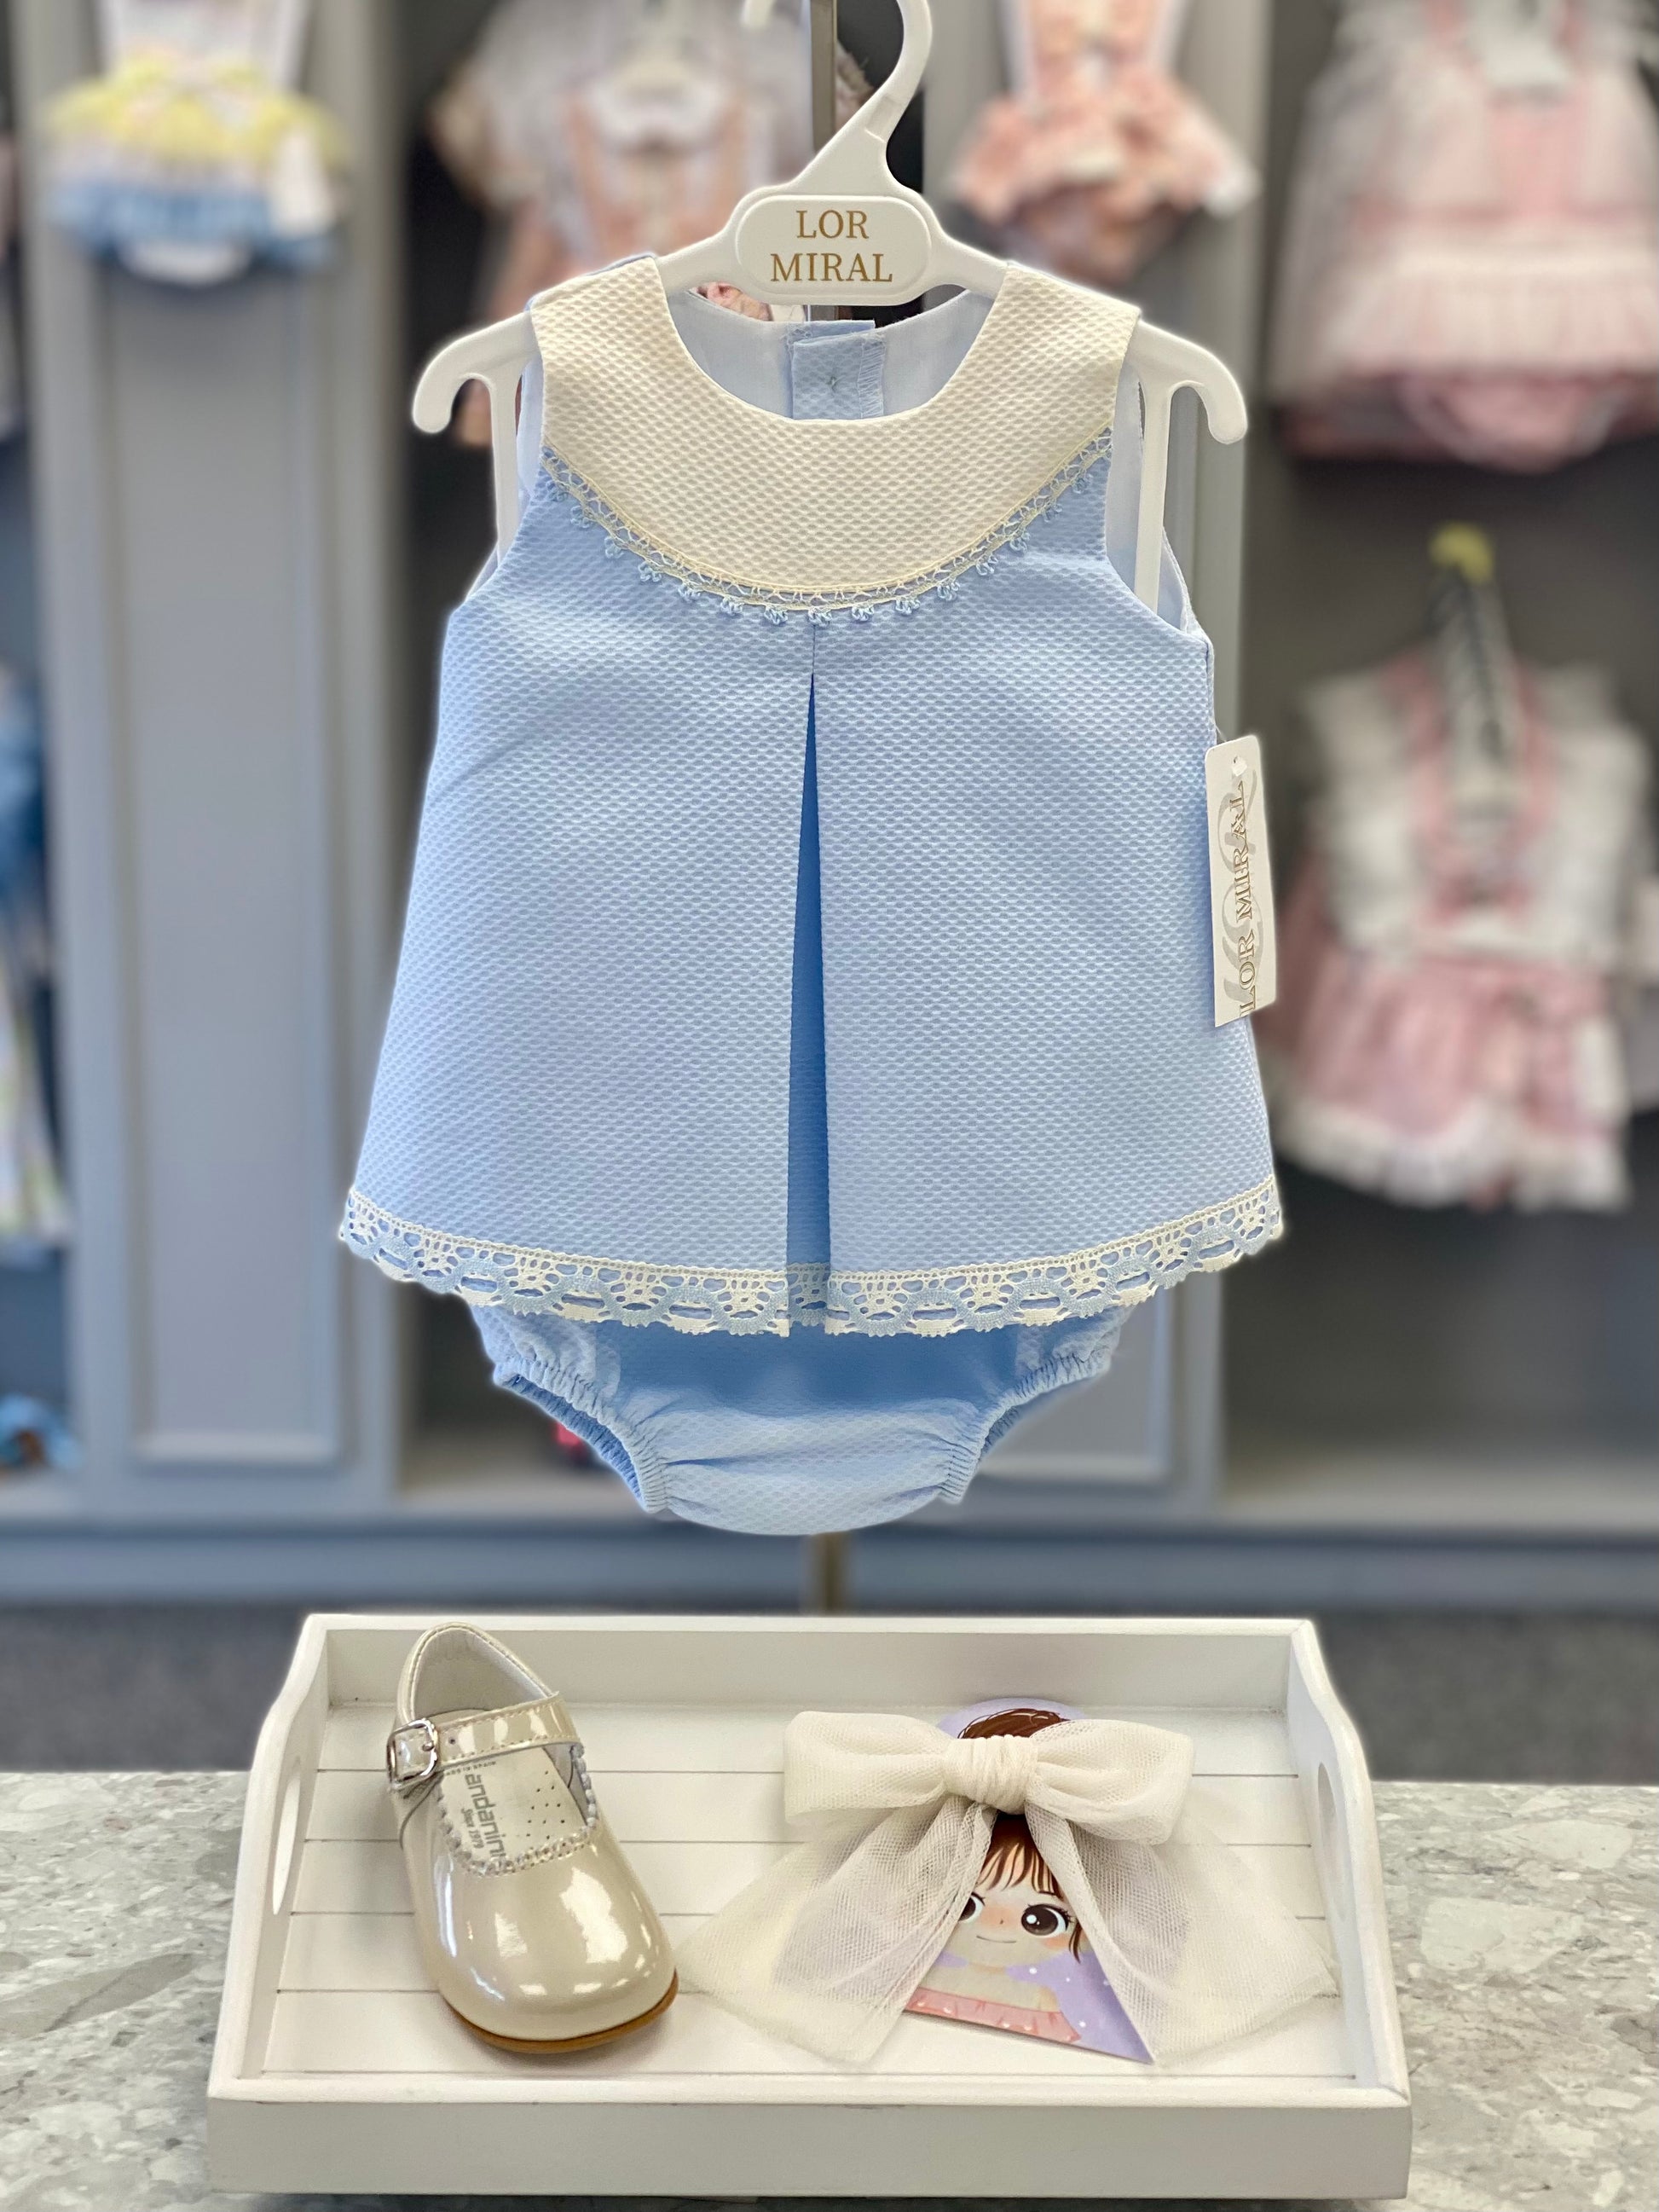 LOR MIRAL Cosmos Baby Girls Blue & Cream Dress & Knickers - 41019